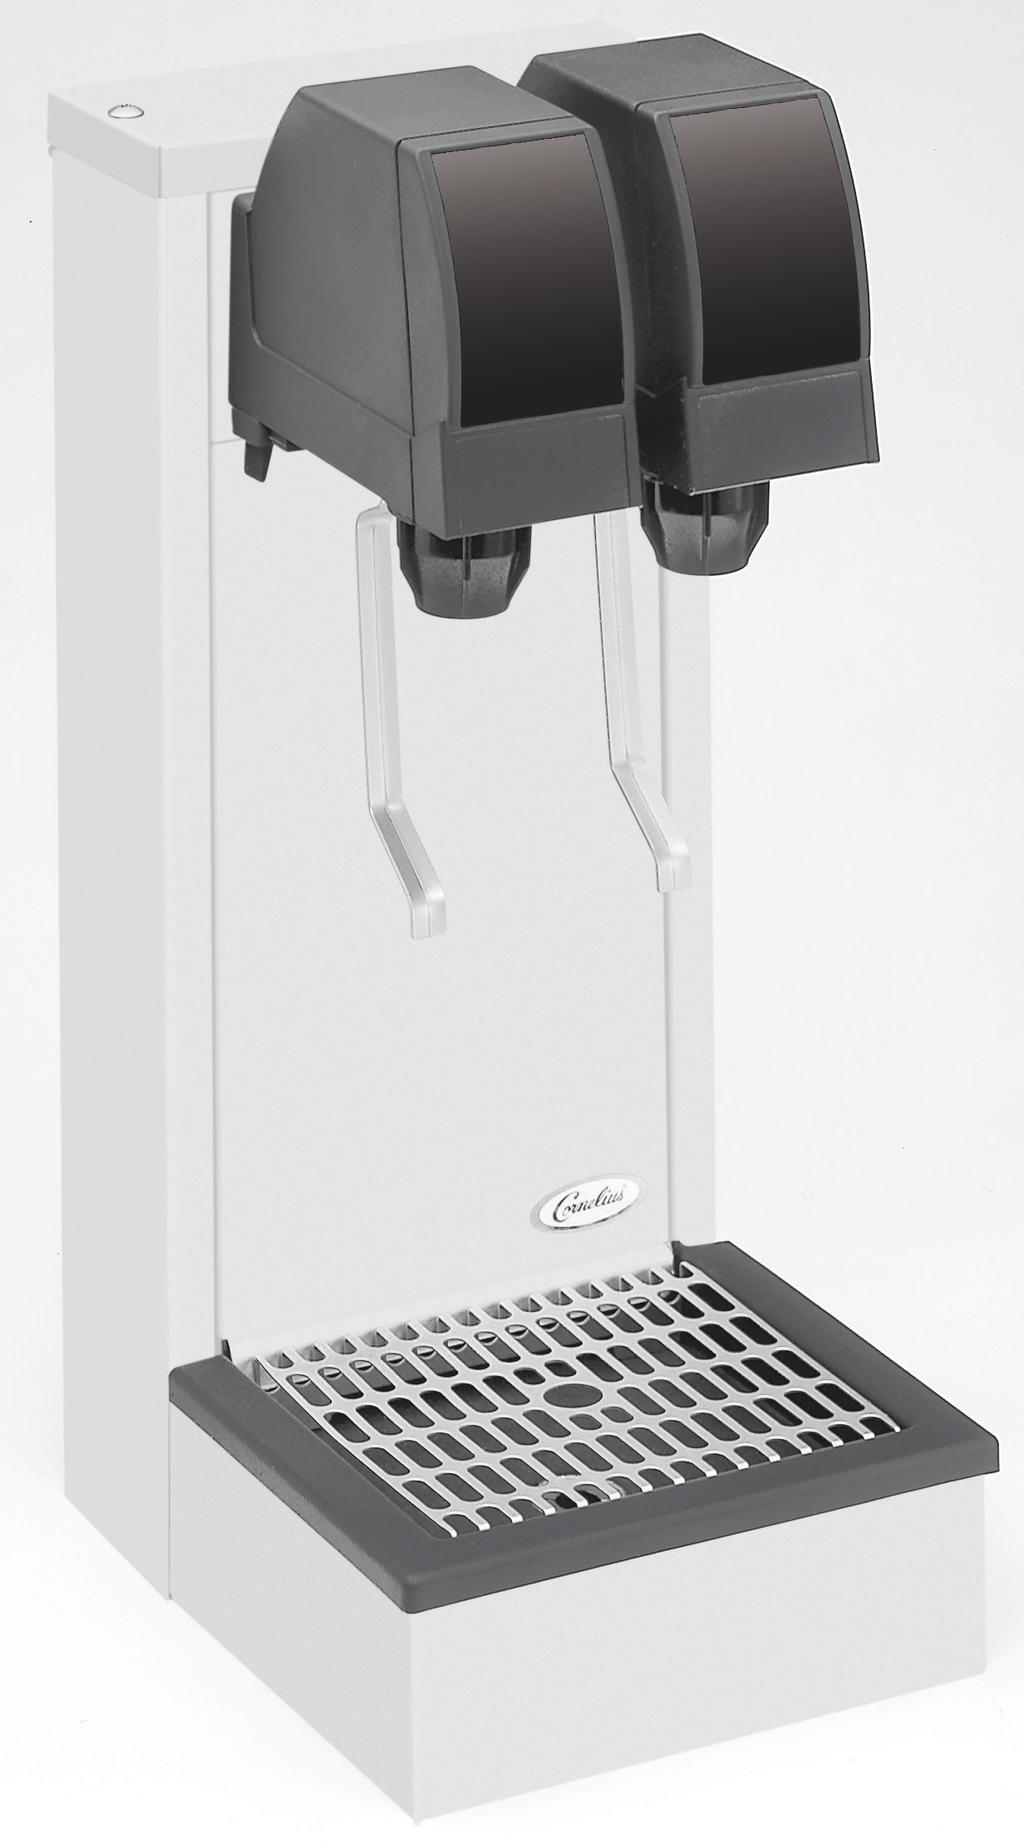 TEA TOWER POST-MIX BEVERAGE DISPENSER FEATURES Variety - One or two flavor capability, UFB-1 TM valves Easy access - Inlet line access from back or bottom of tower Options - Drip tray can be